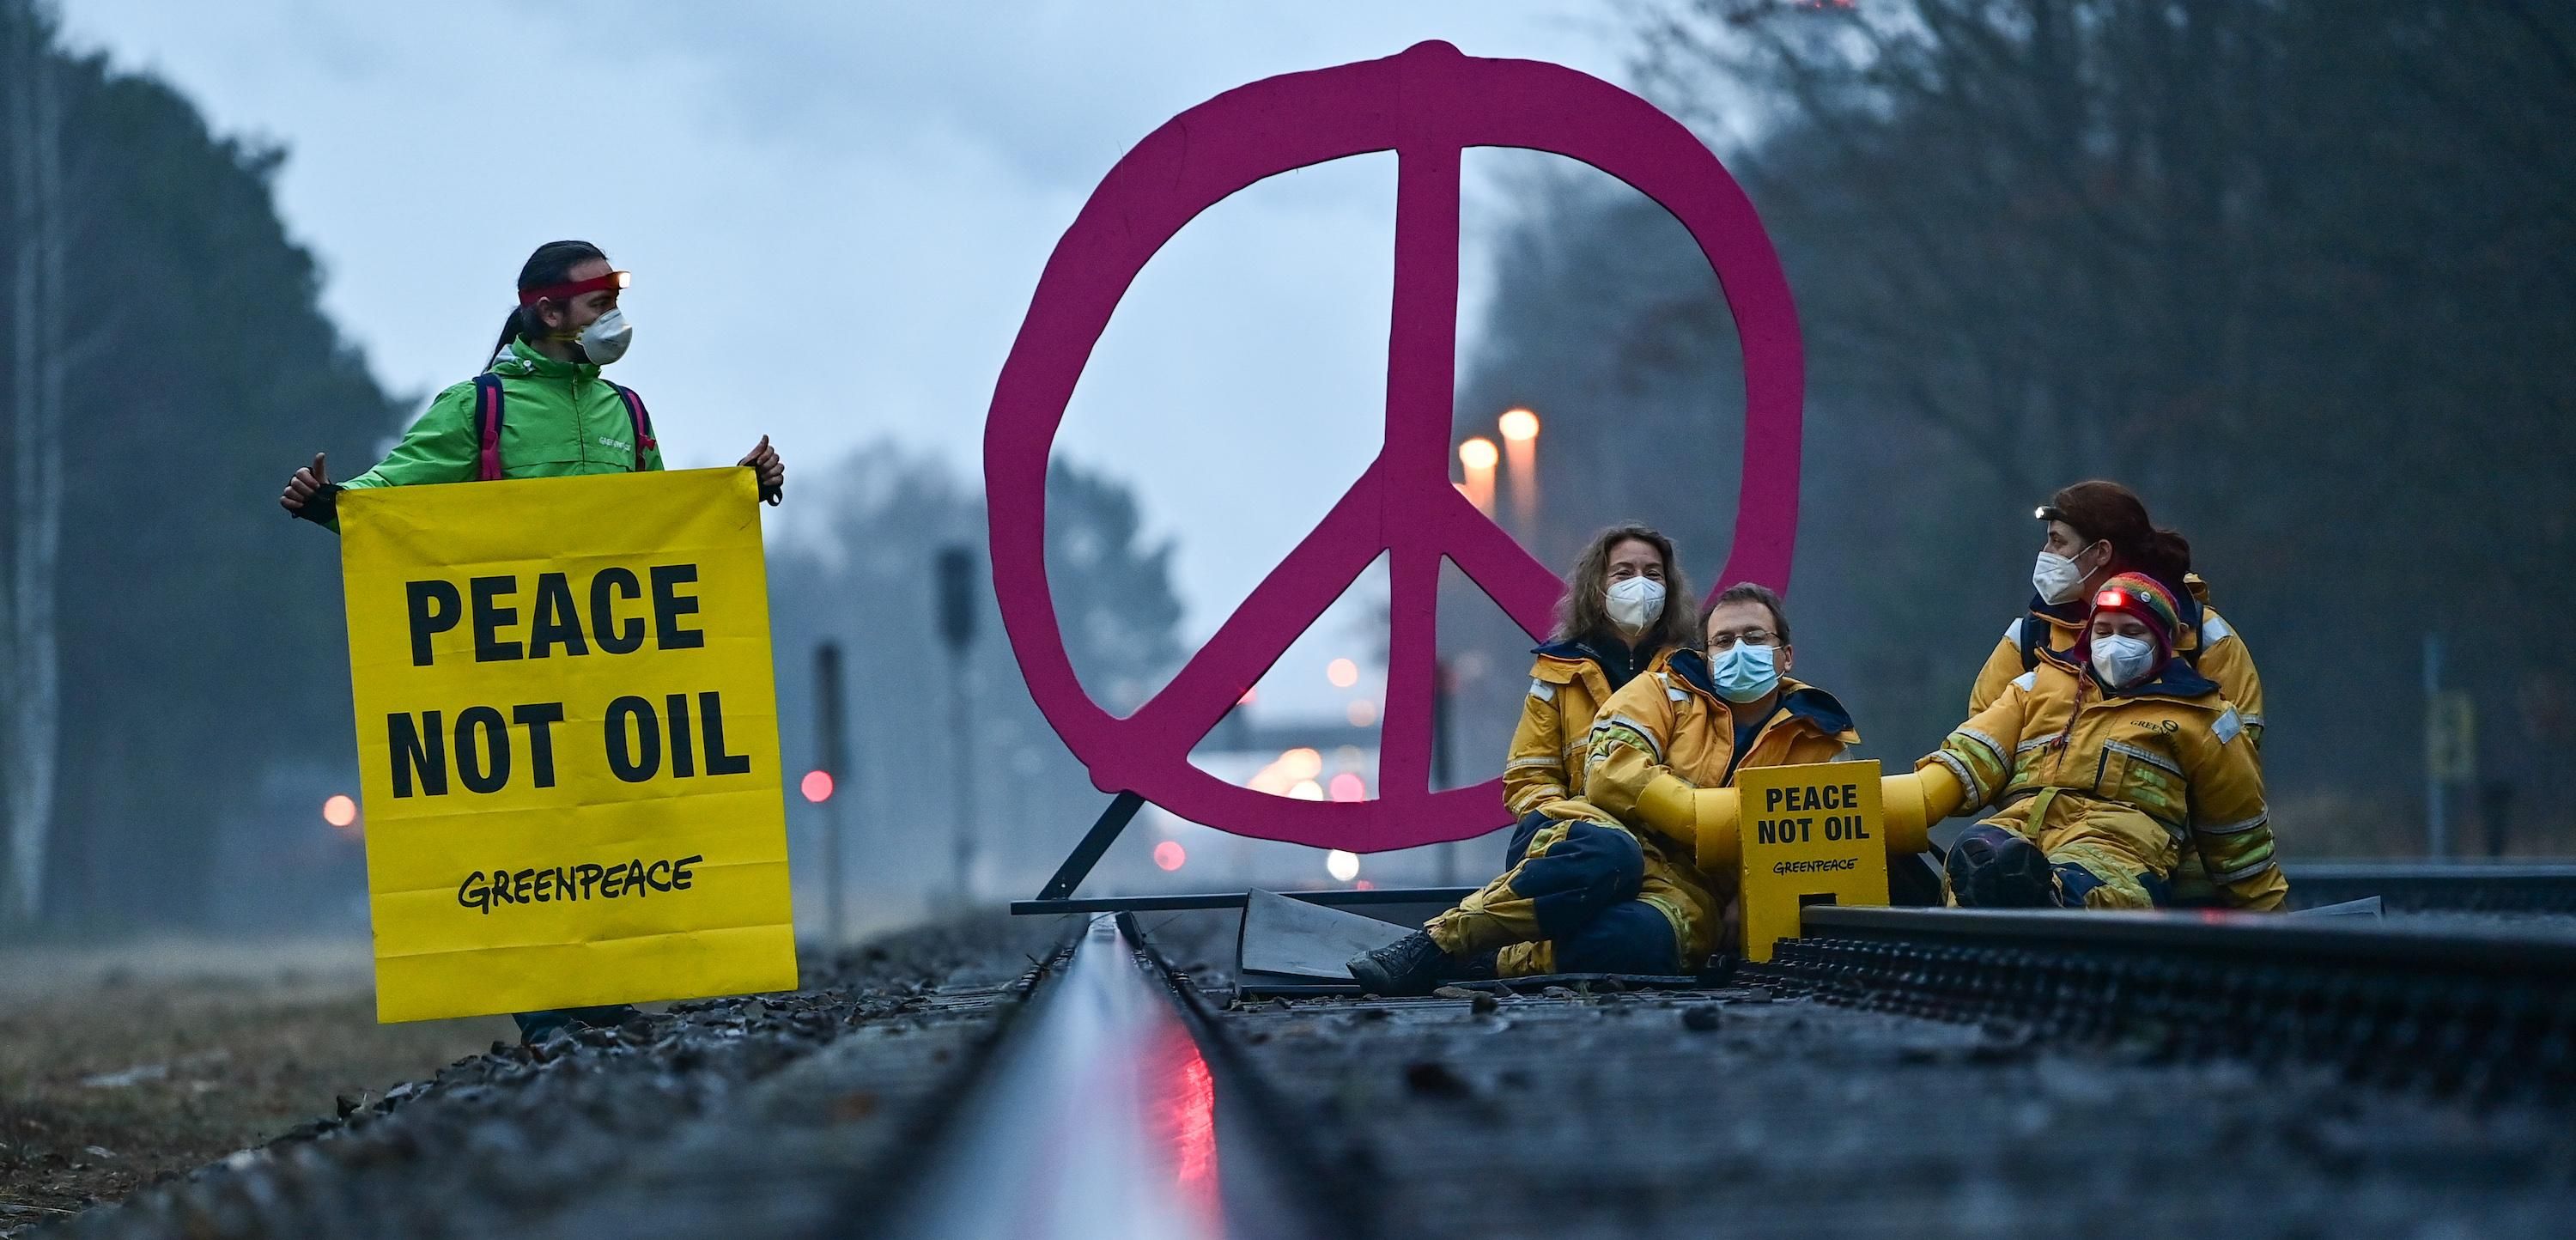 Activists from Greenpeace block a rail track leading to the oil refinery of PCK-Raffinerie GmbH in Germany on March 15, 2022 to protest against fossil imports from Russia and the indirect financing of the war in Ukraine. (Photo: Patrick Pleul/dpa-Zentralbild/ZB via Getty Images)